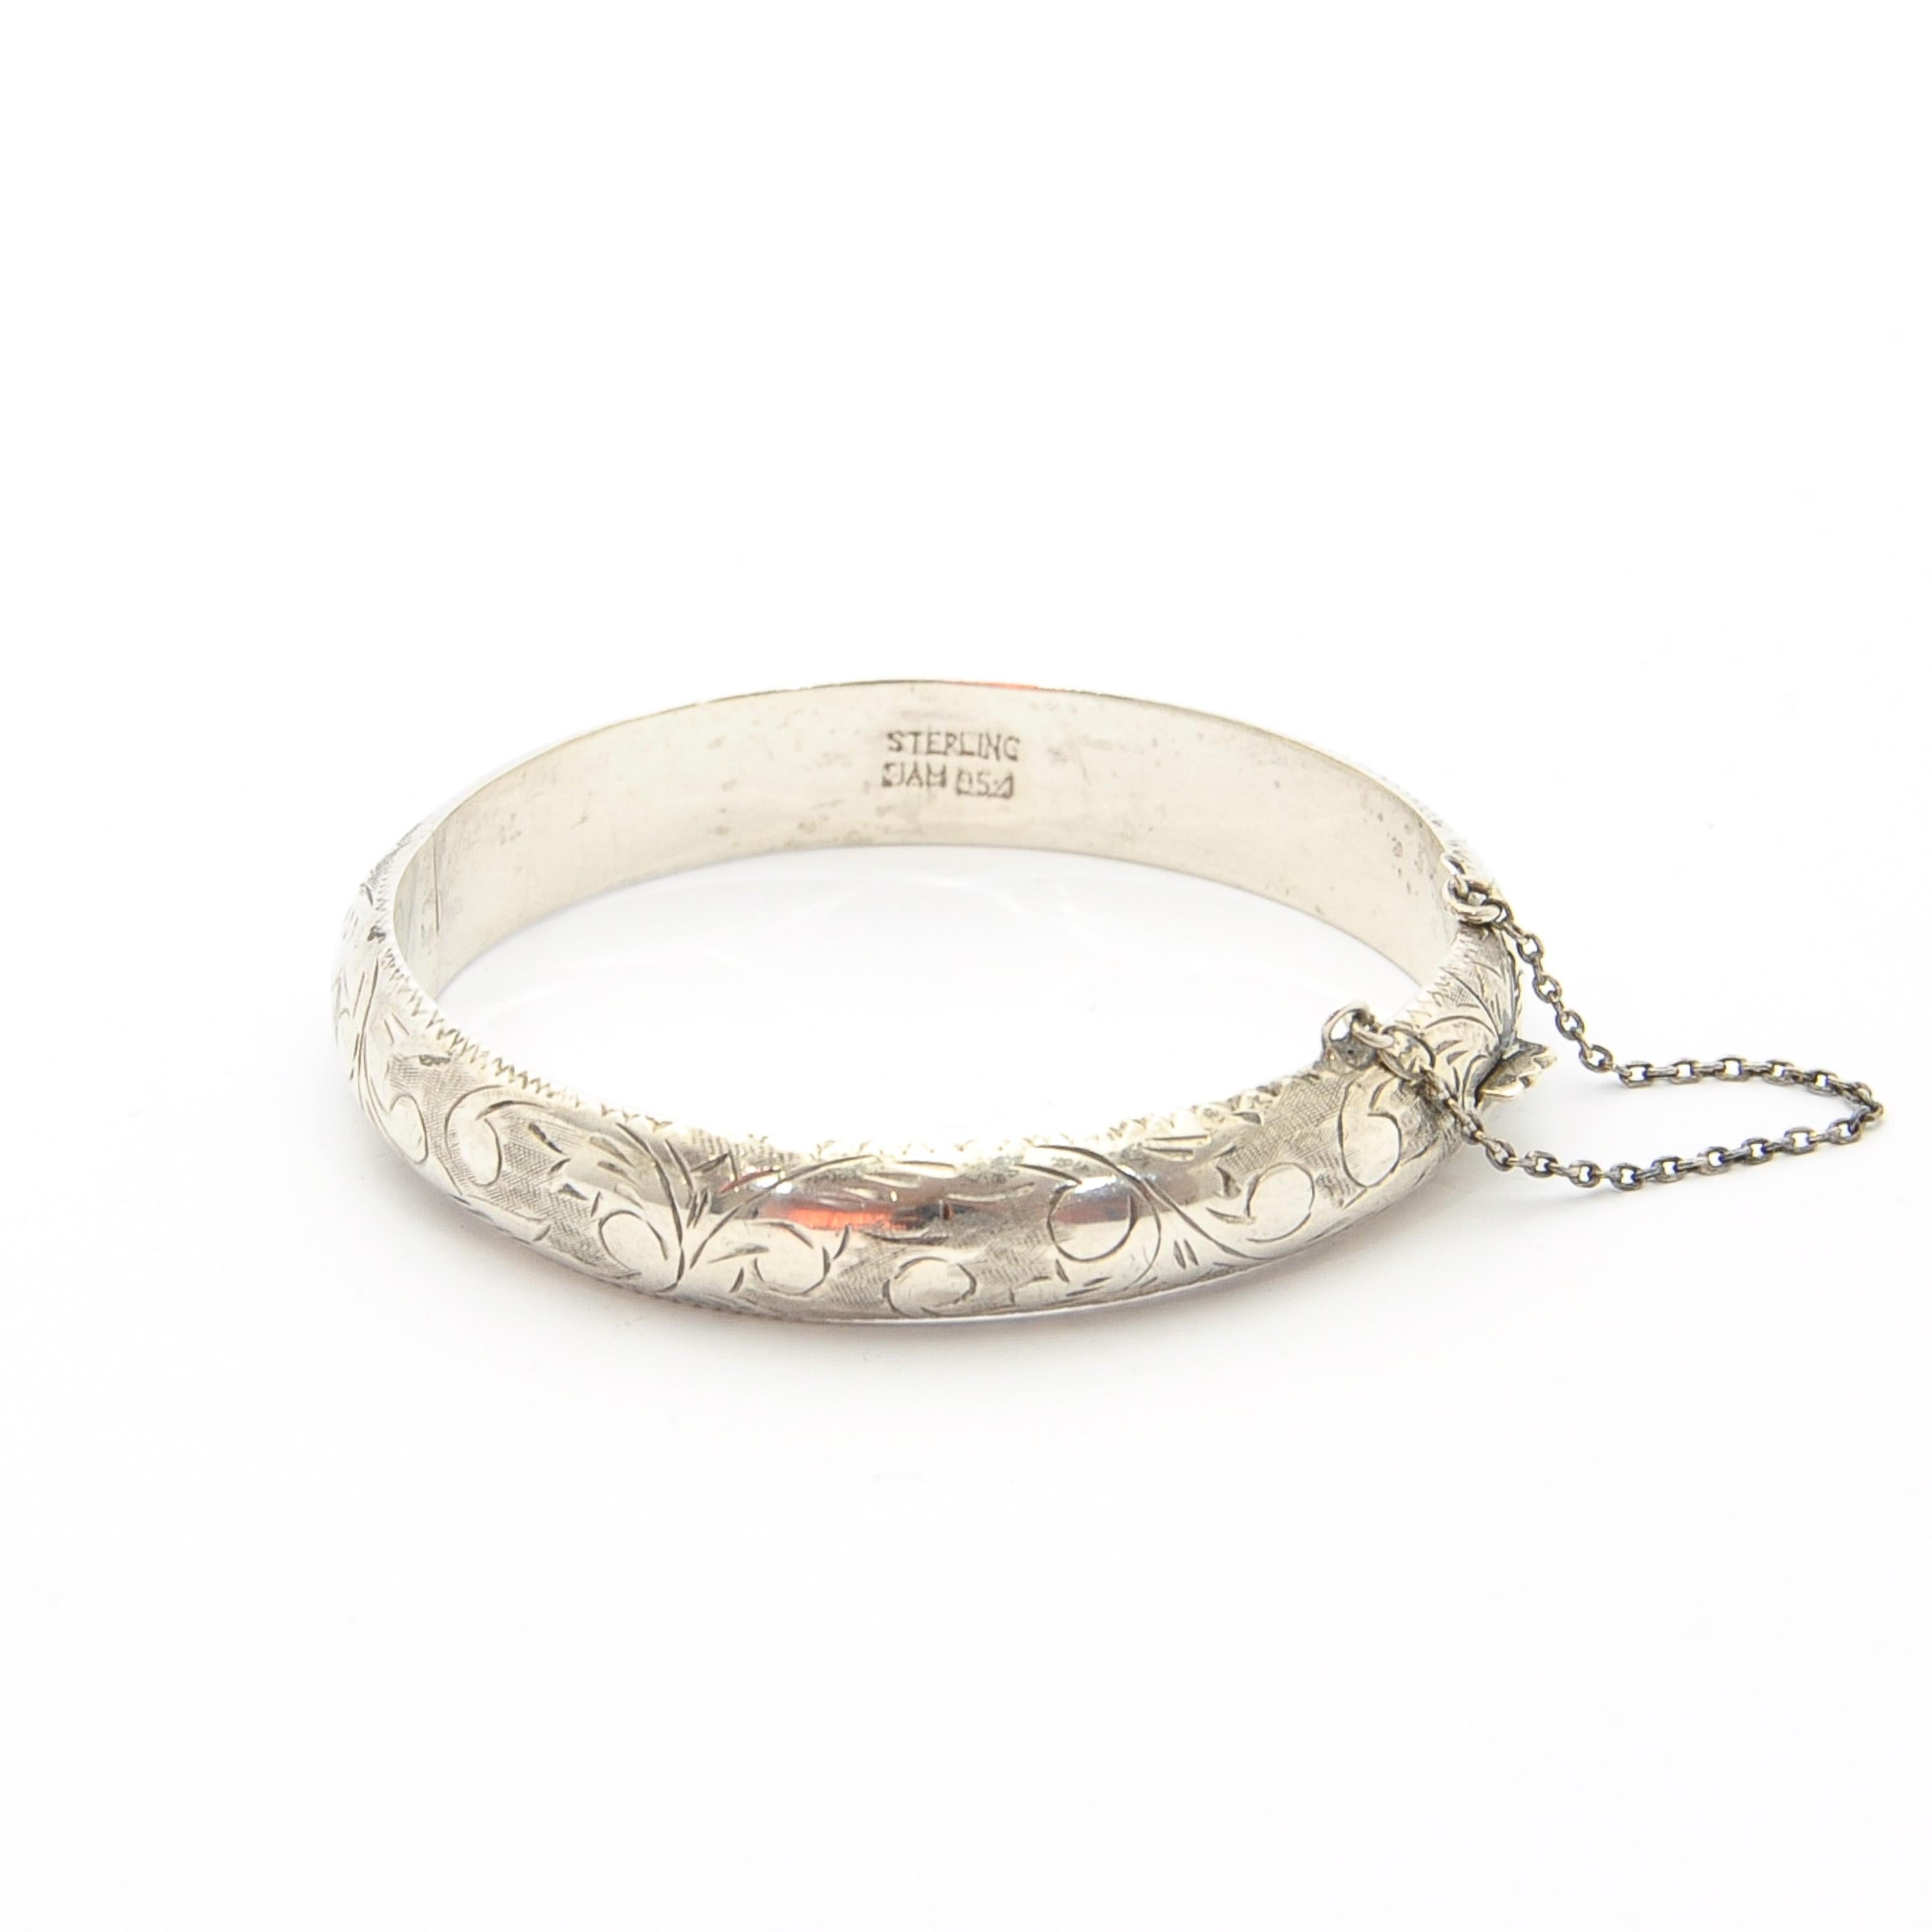 This mid-century bangle is comprised of 952 silver. It features diagonal etched lines, swirls and curl designs across its surface. The bangle has a smooth silver inside. It is hinged and closes with a push-in compression tab closure. The bracelet is